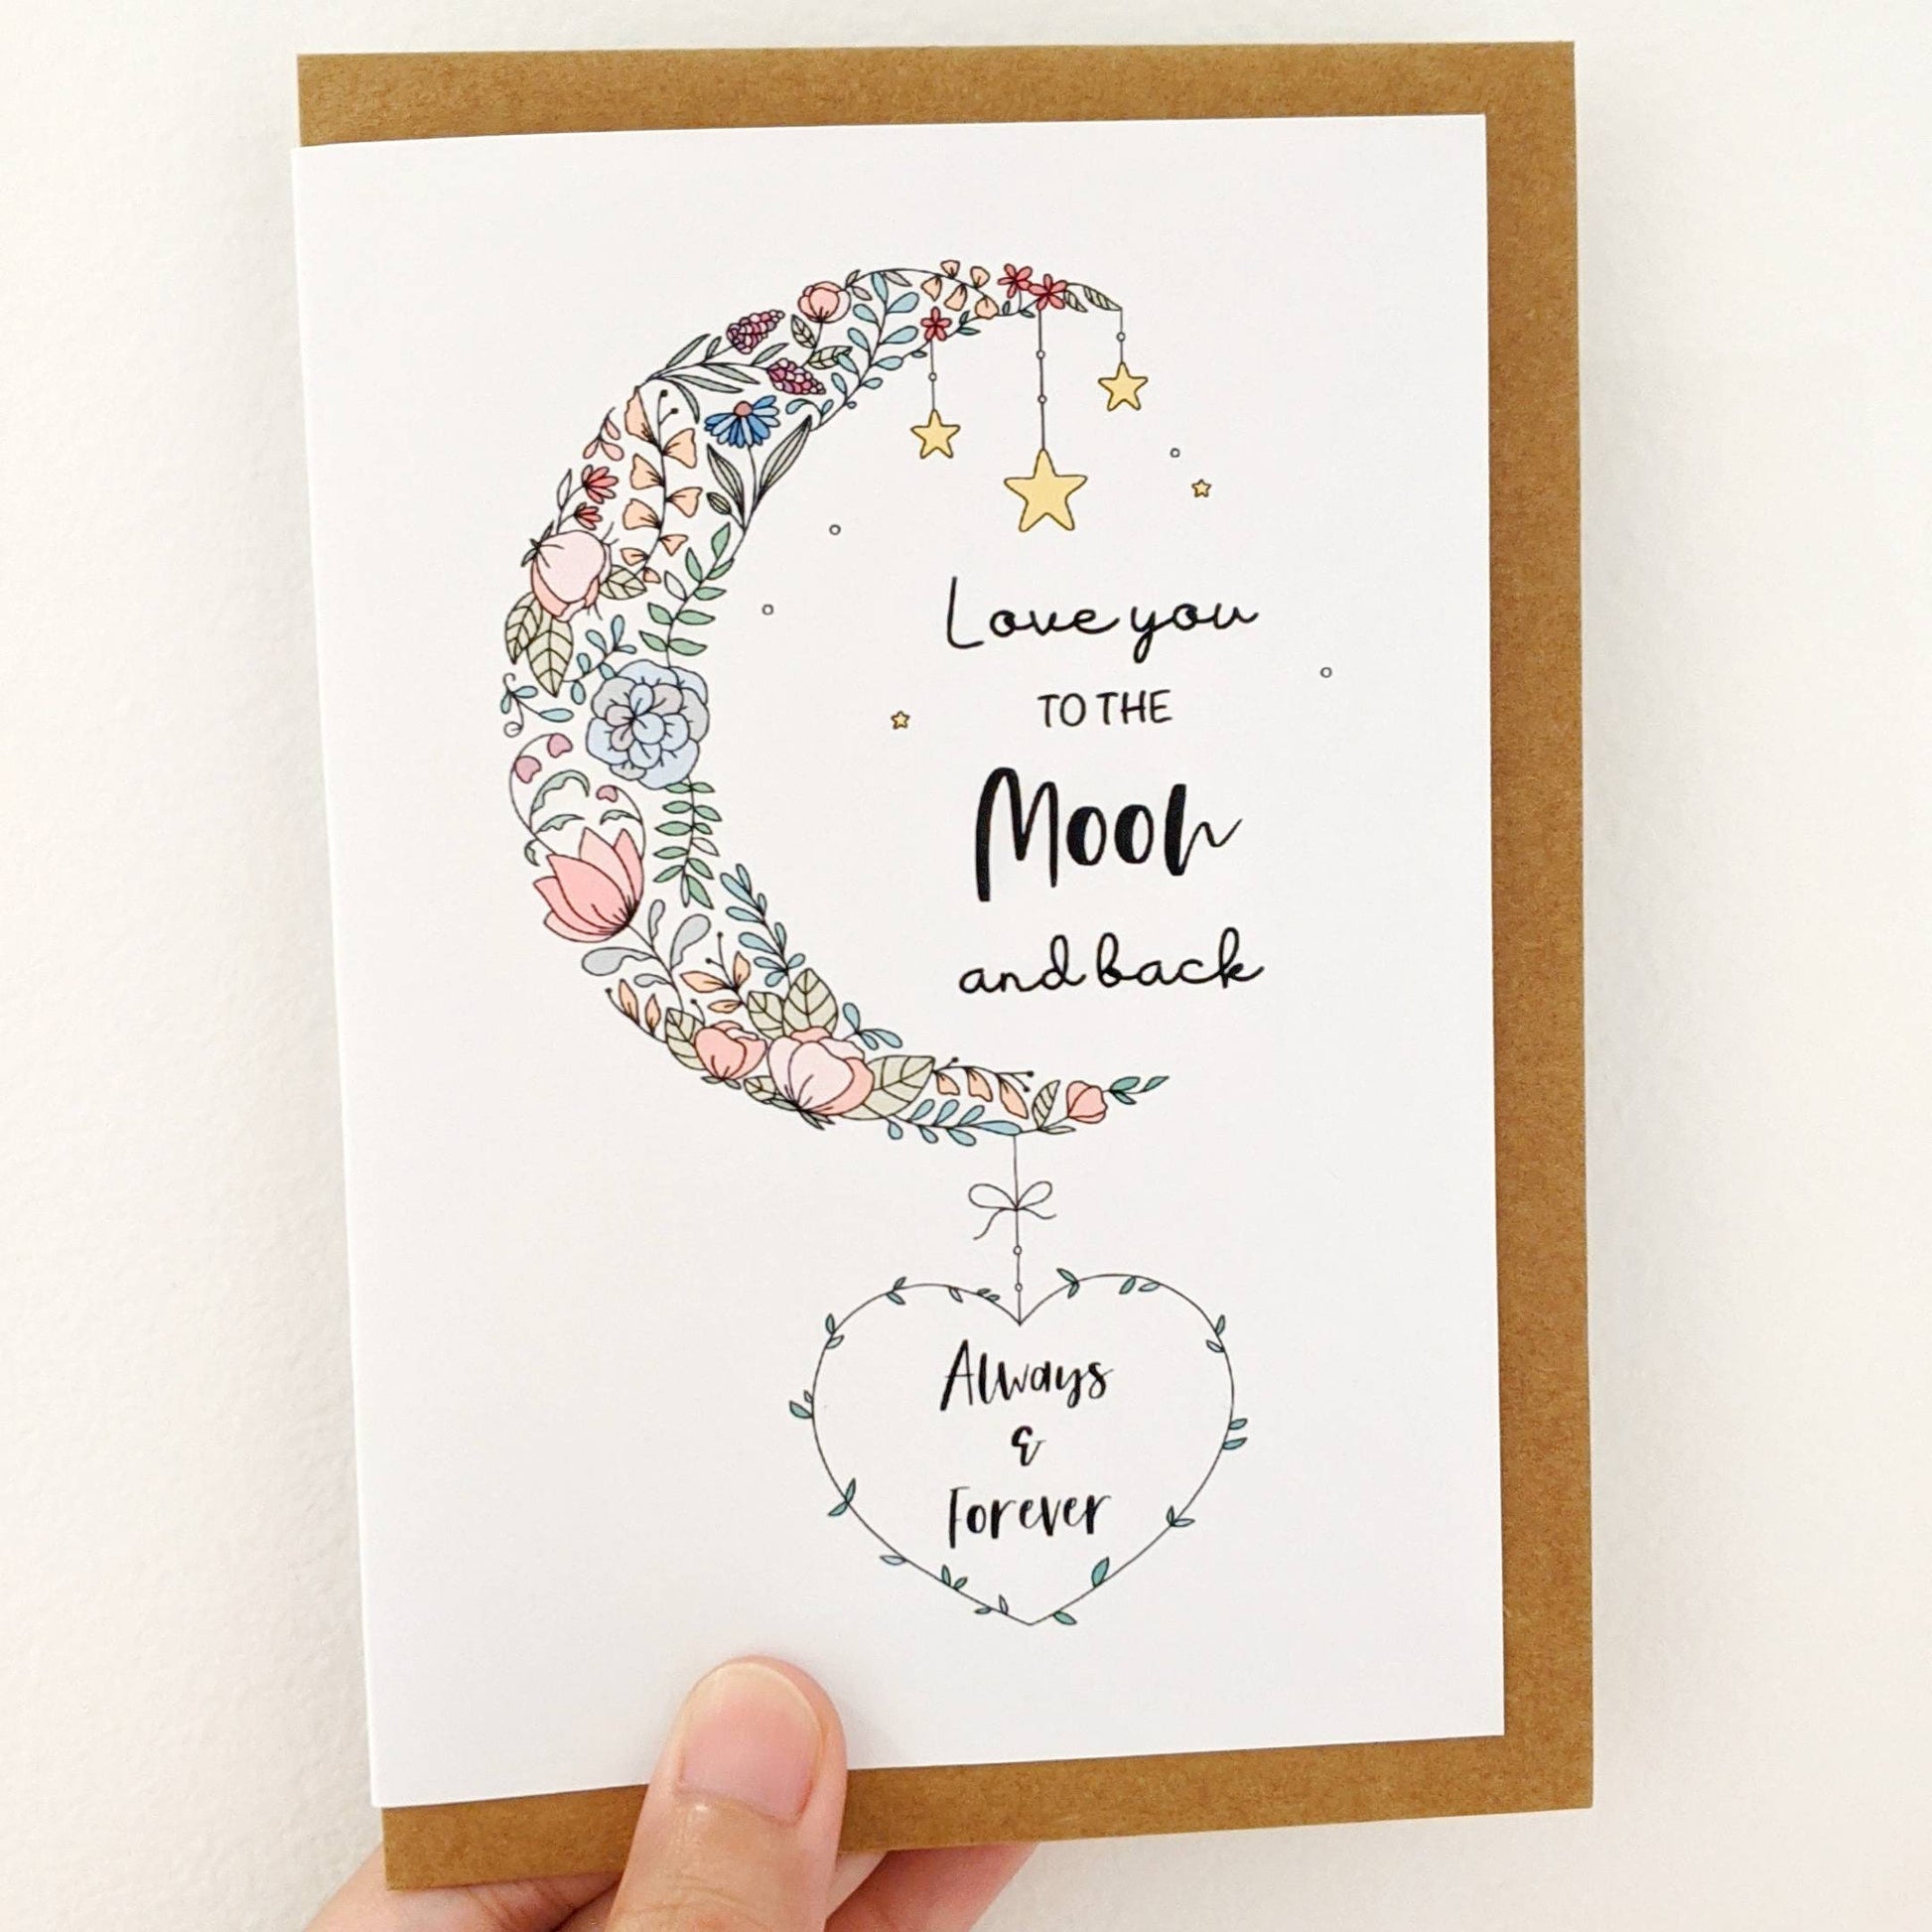 Greeting card held by hand with lettering with words "Love You To The Moon and back" with illustration of moon embelished with flowers and leaves decorated with stars. At the bottom is a leaf heart wreath with wording "Your Text Here"